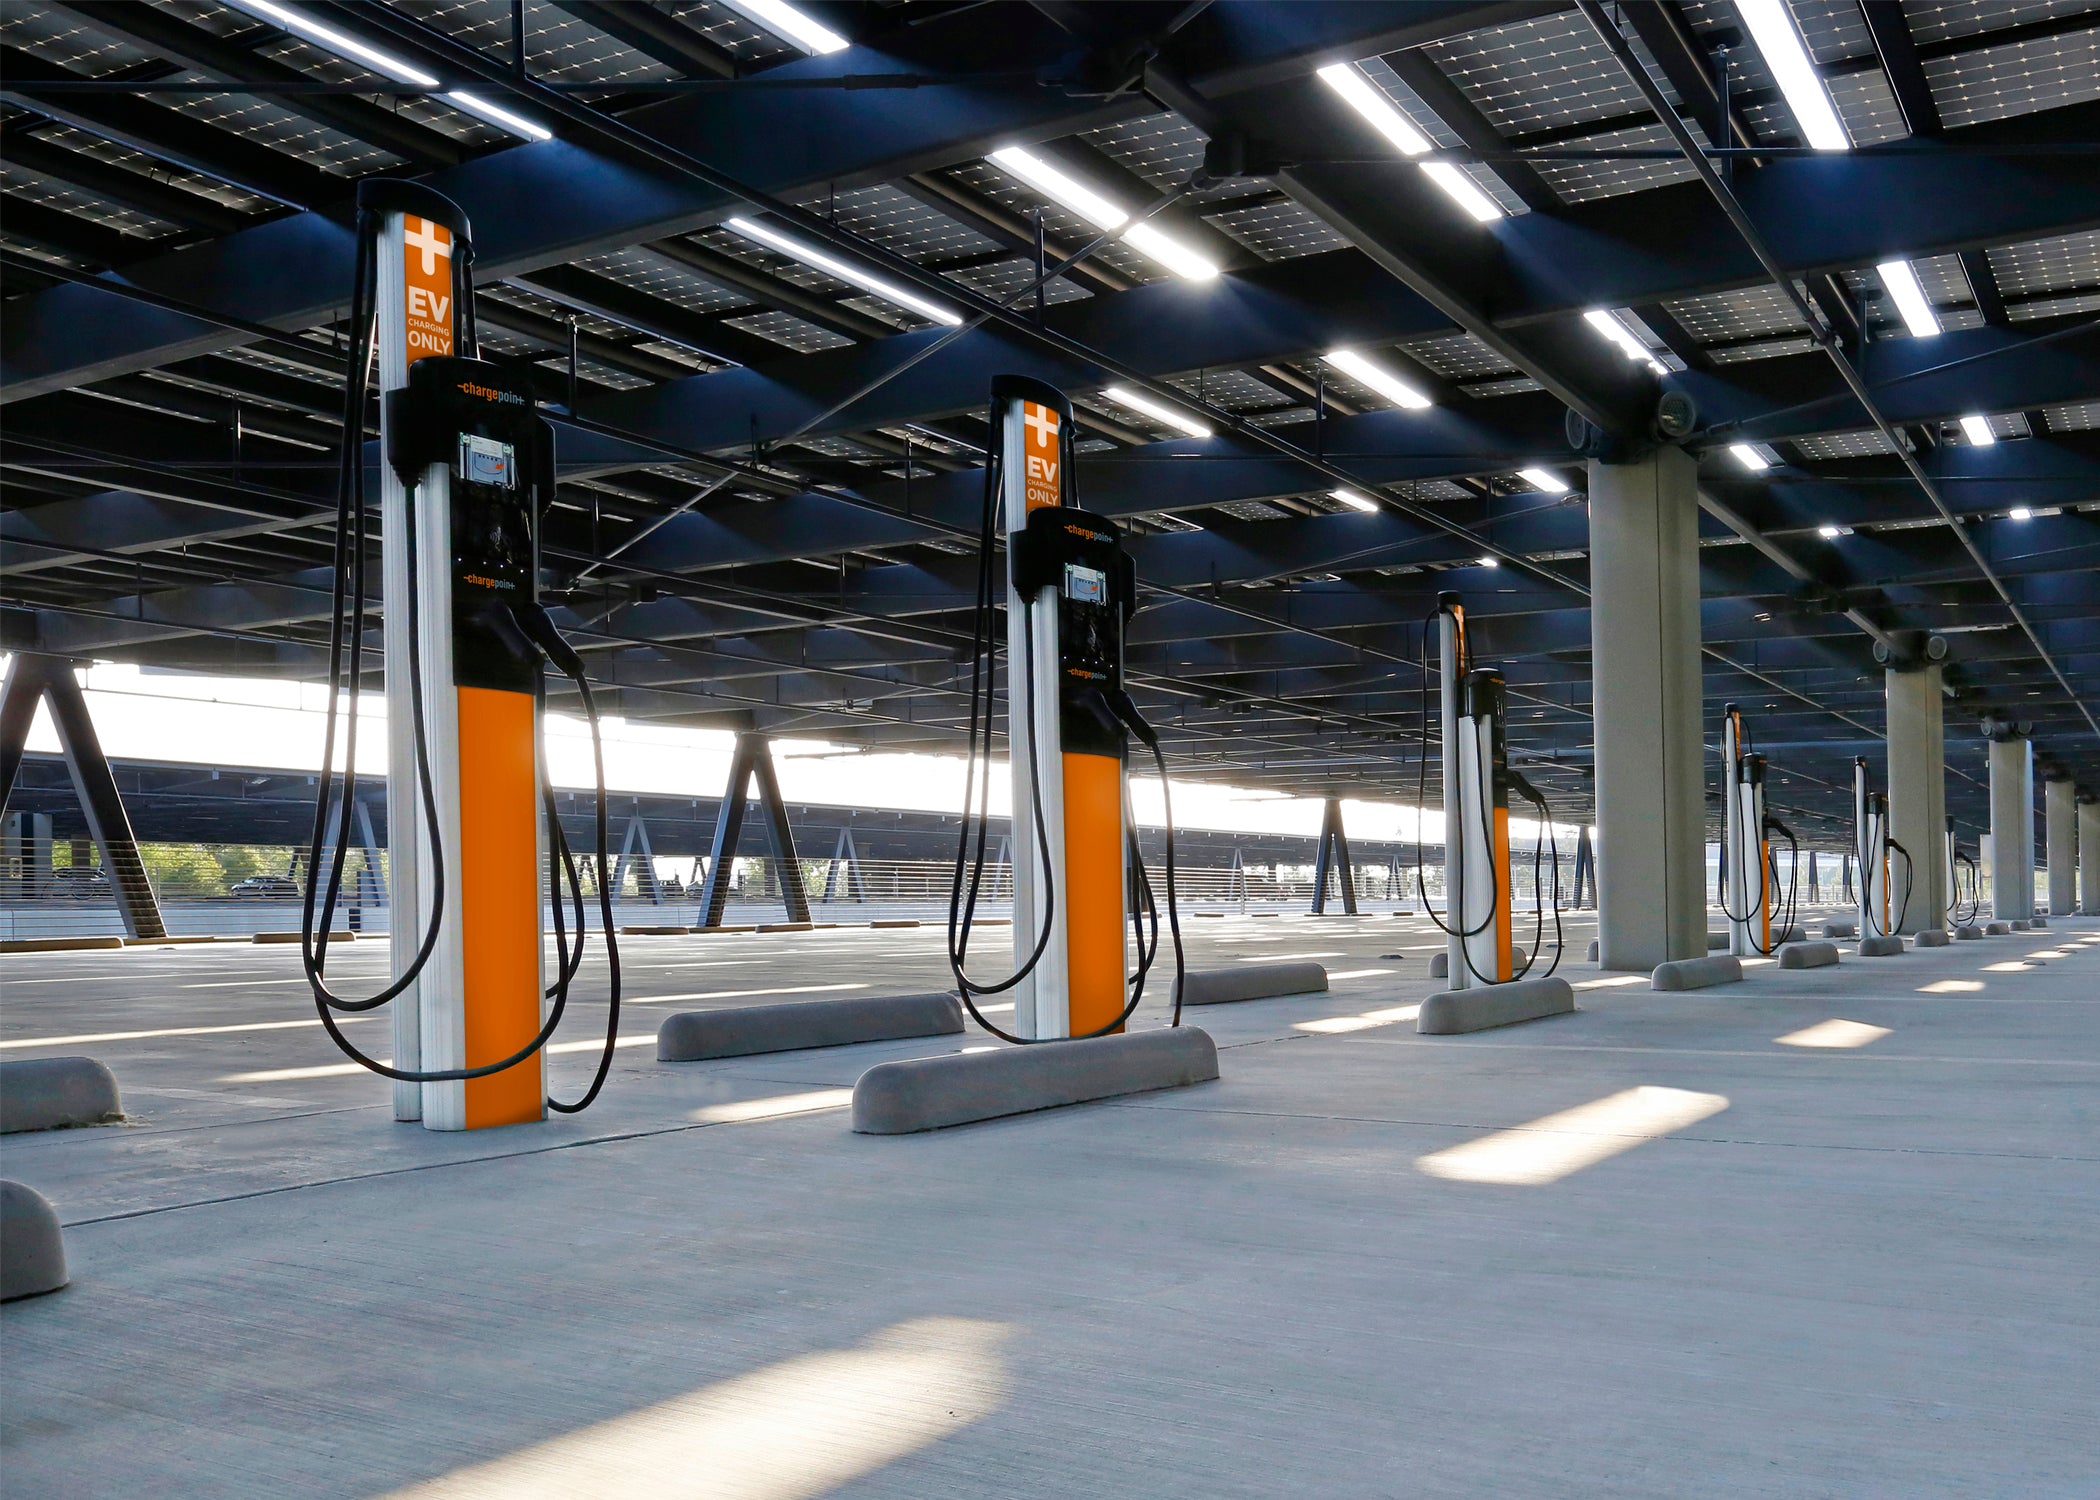 ev chargers in a parking garage